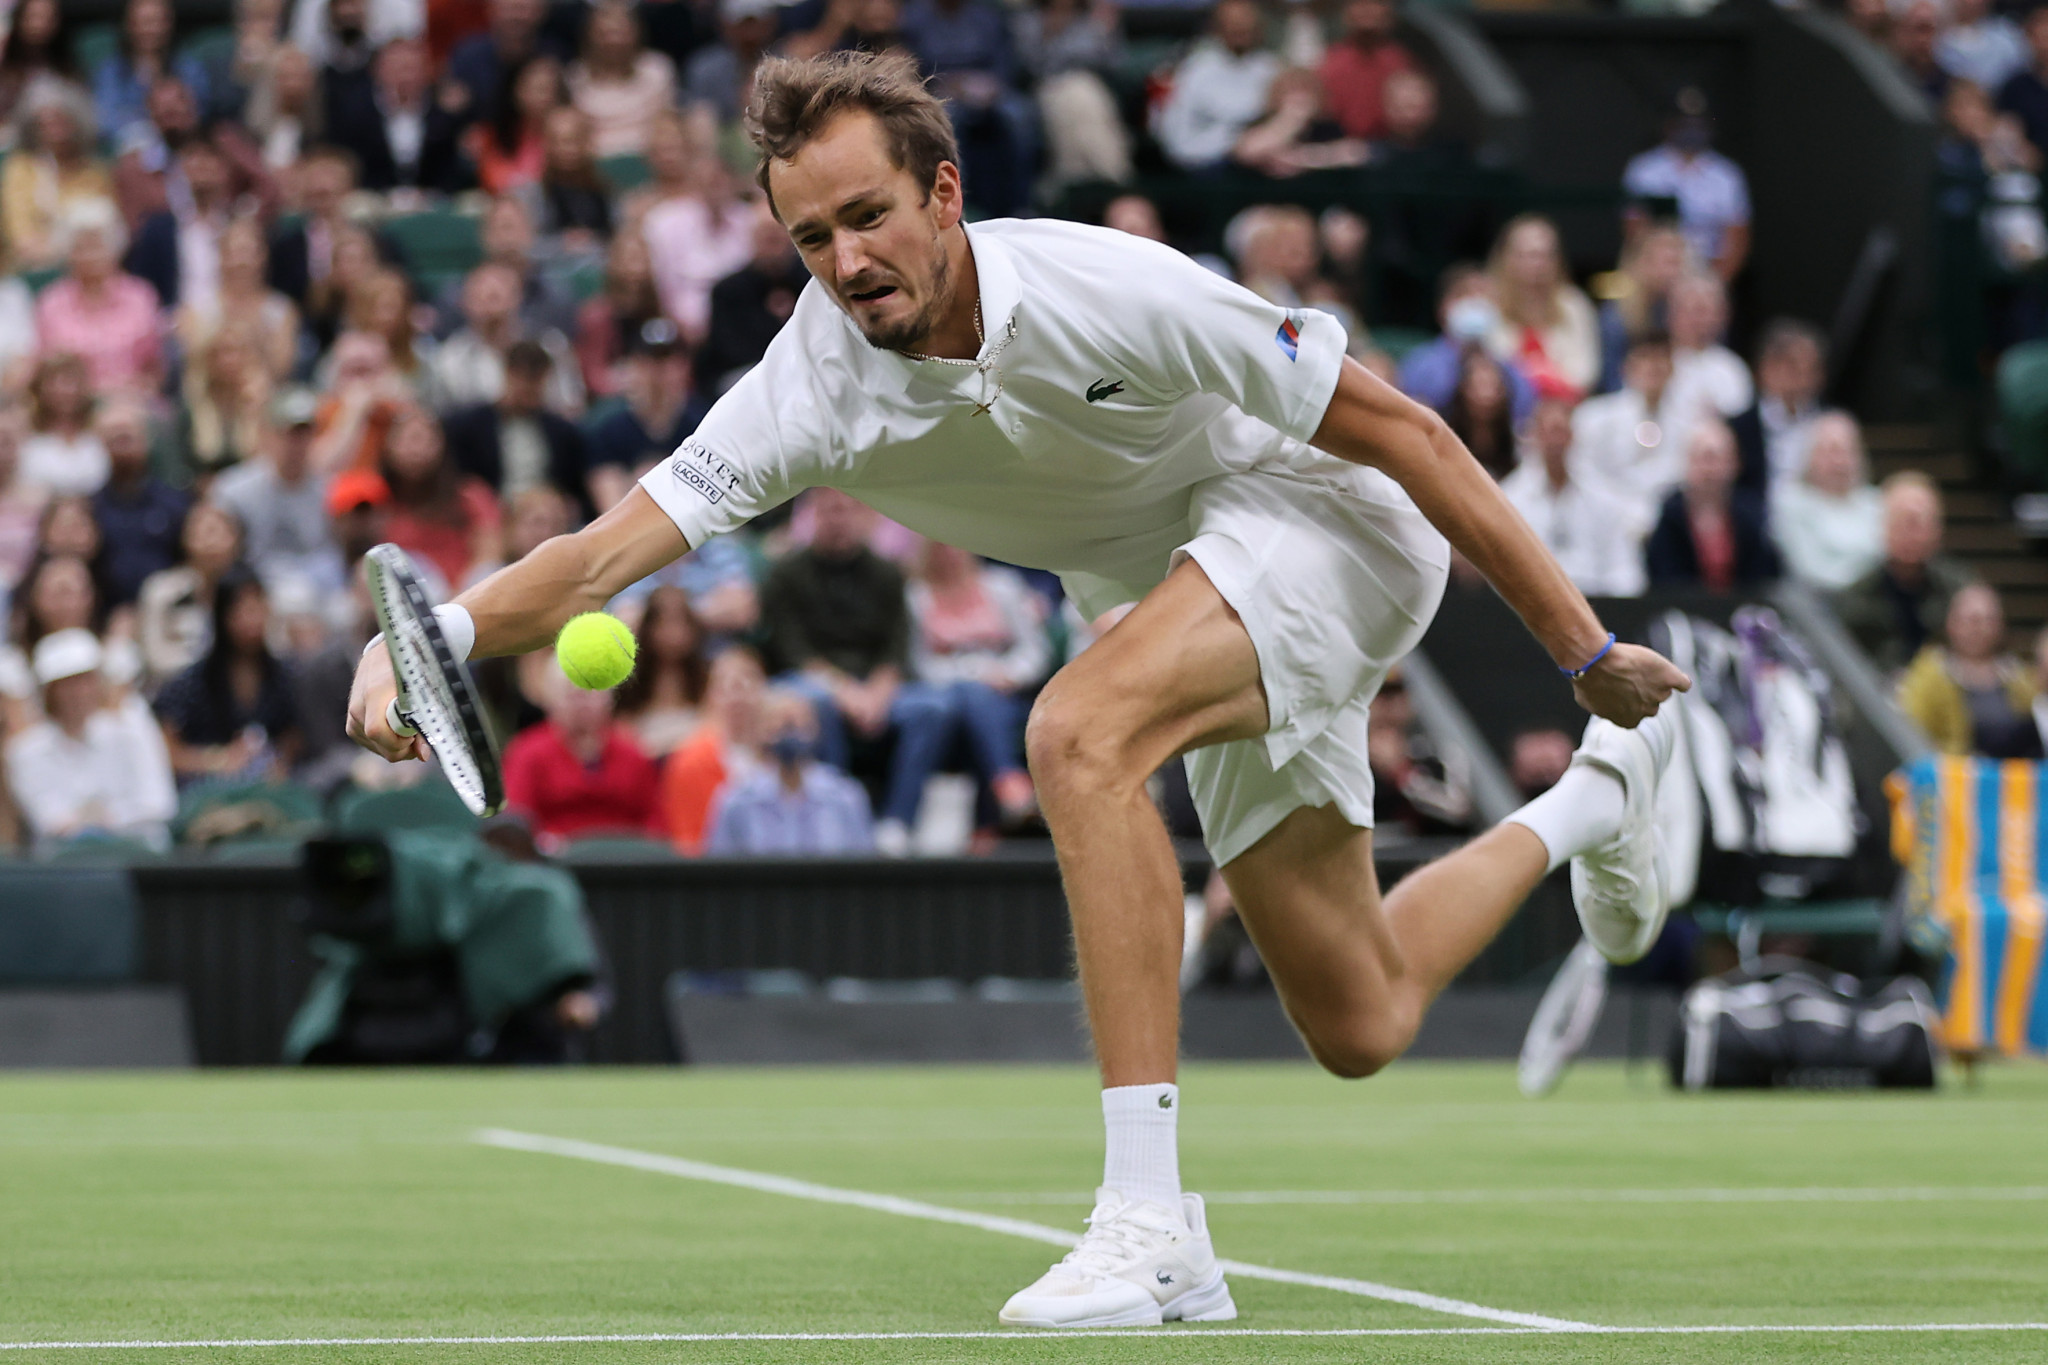 Russia's Daniil Medvedev could become world number one despite being banned from this year's Wimbledon, as Novak Djokovic stands to lose 2,000 ranking points ©Getty Images